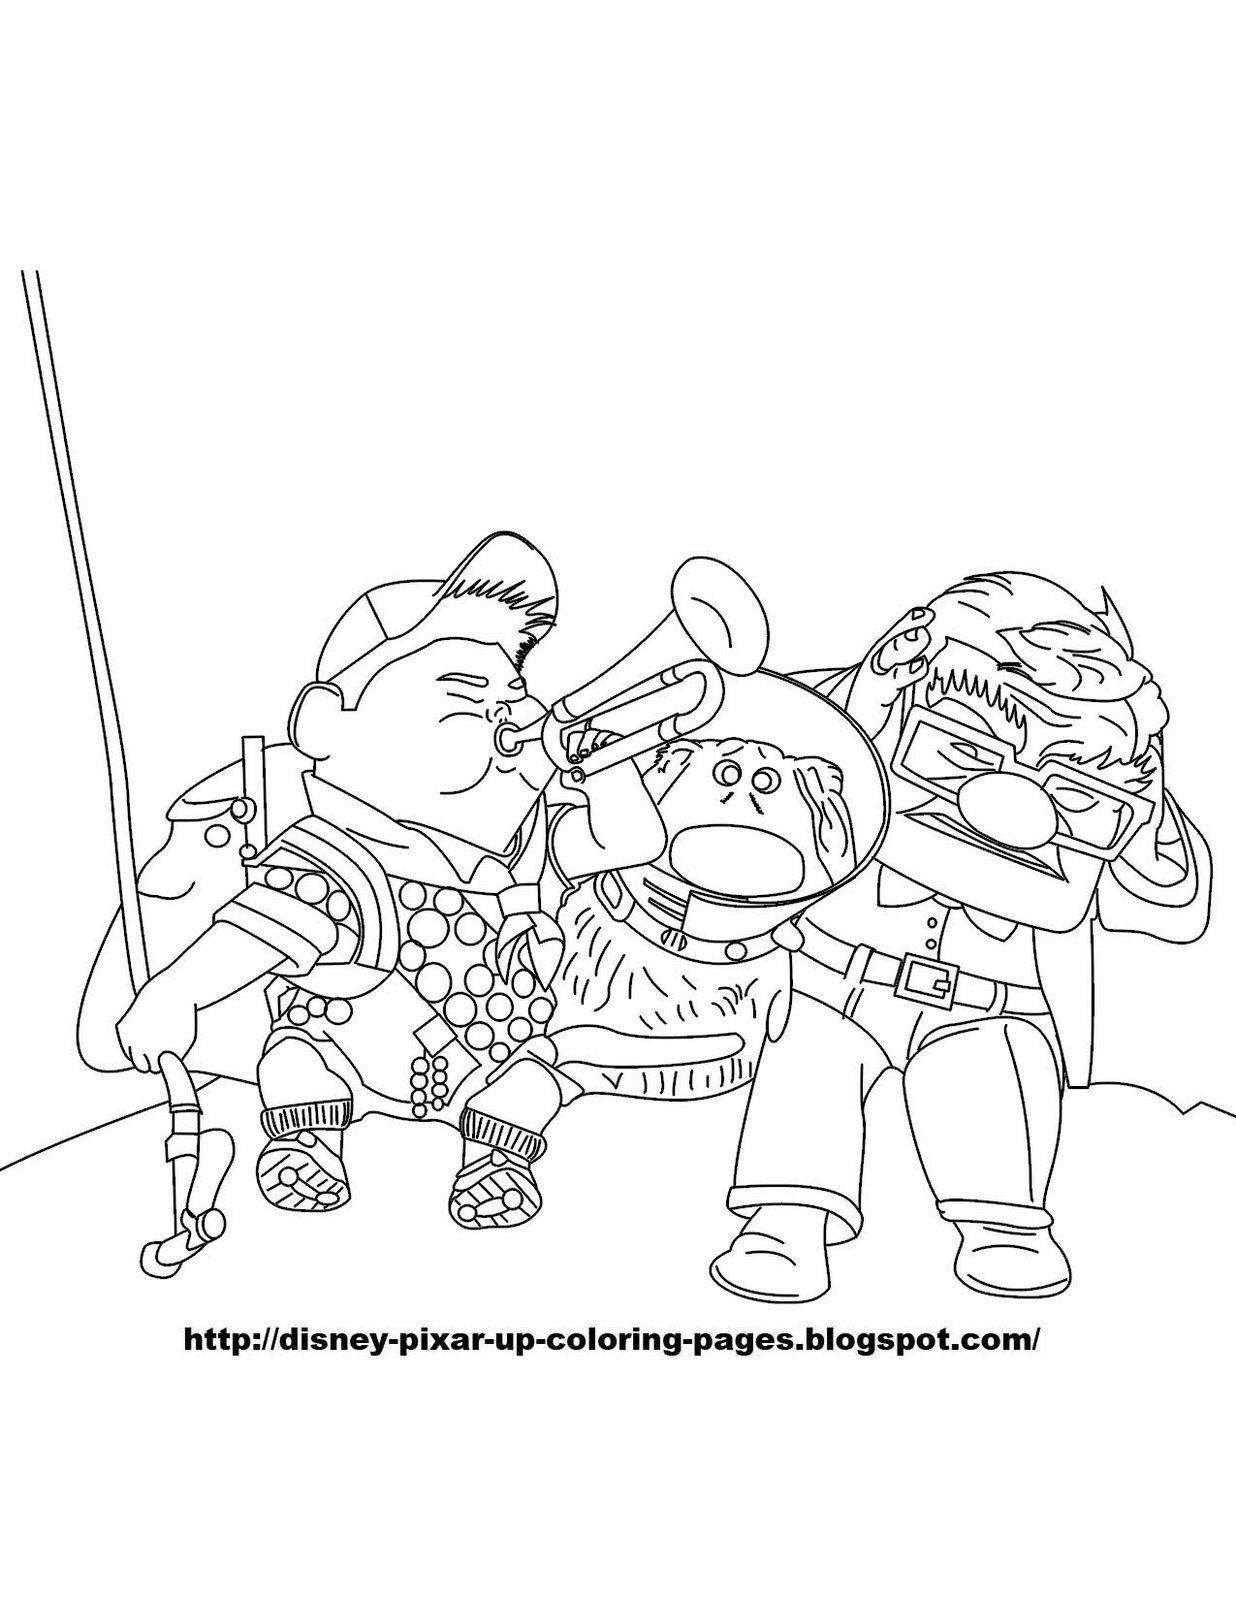 Featured image of post Pixar Colouring Pages / 39+ disney pixar coloring pages for printing and coloring.